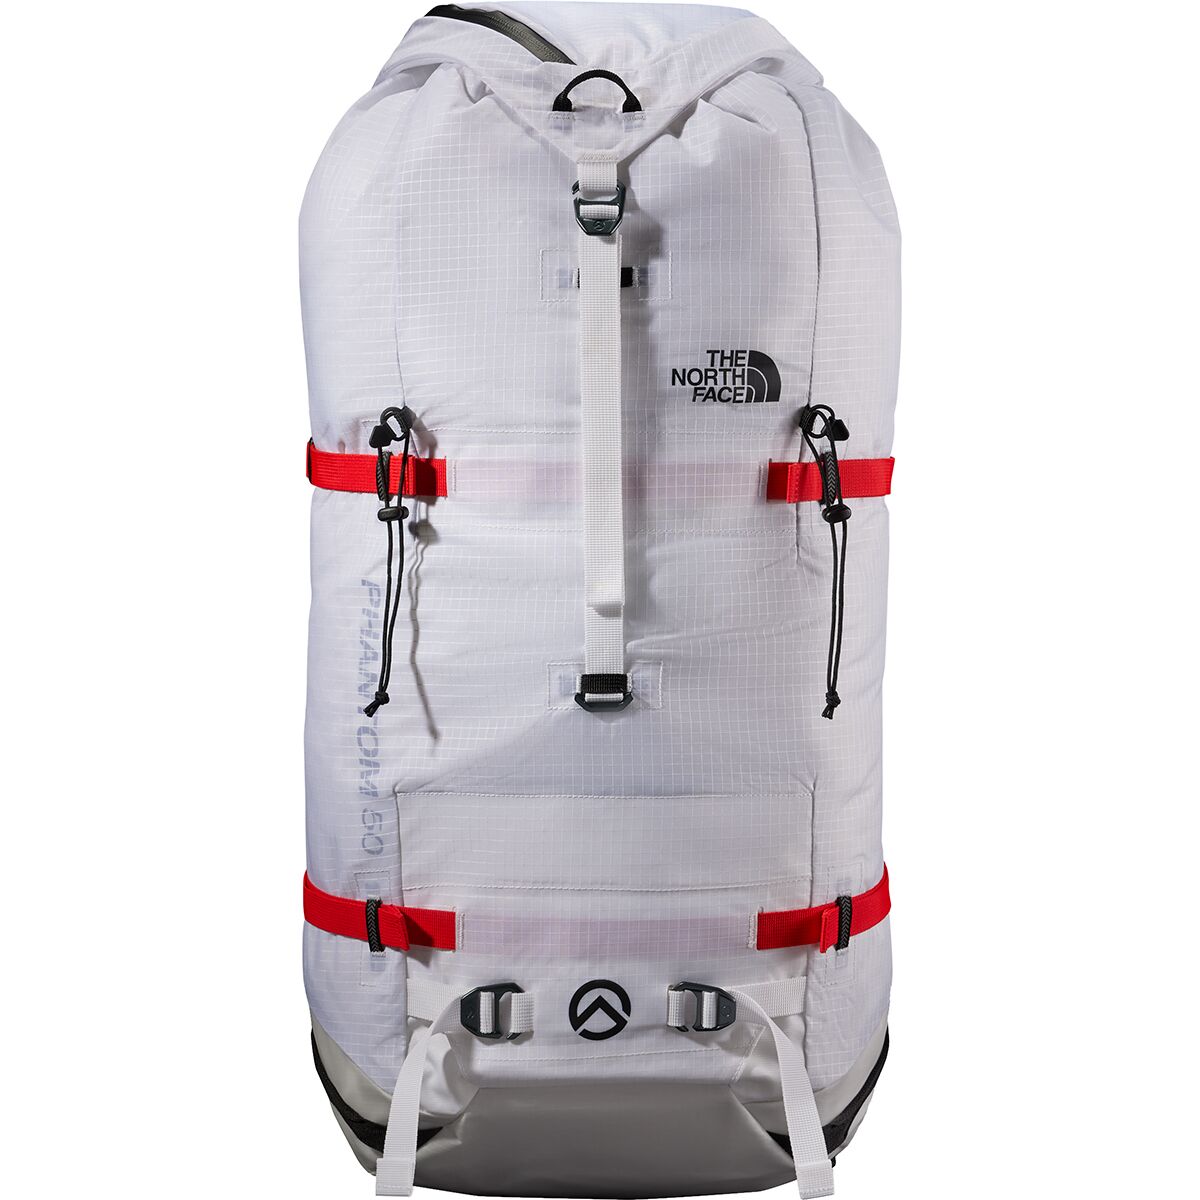 The North Face Phantom 50L Backpack